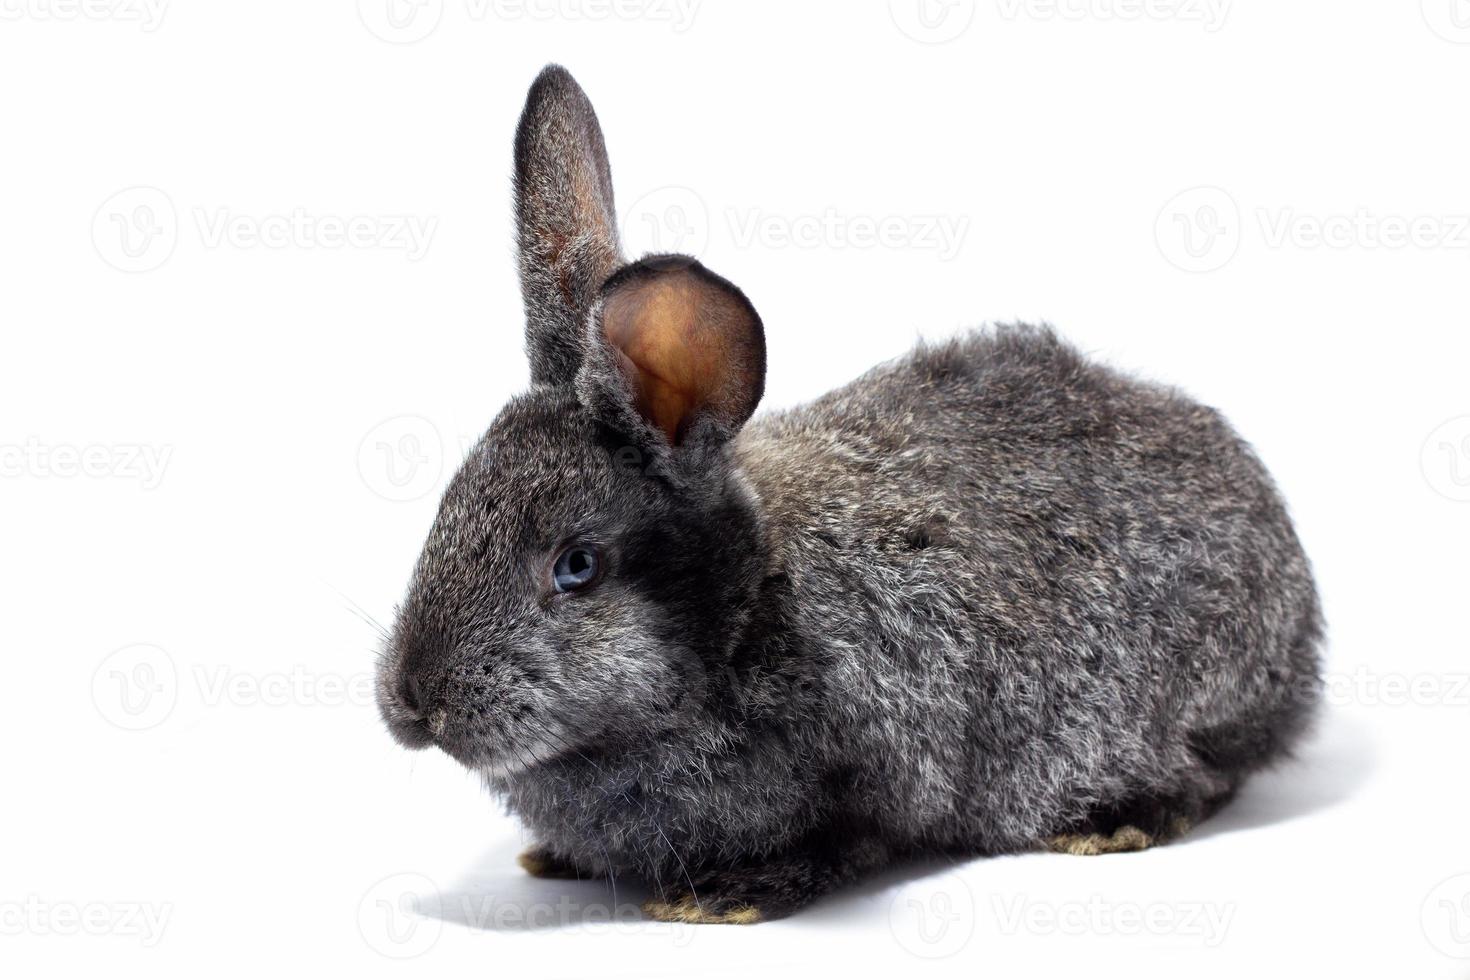 small fluffy grey rabbit isolated on white background, Easter Bunny. Hare for Easter close-up on a white background. photo